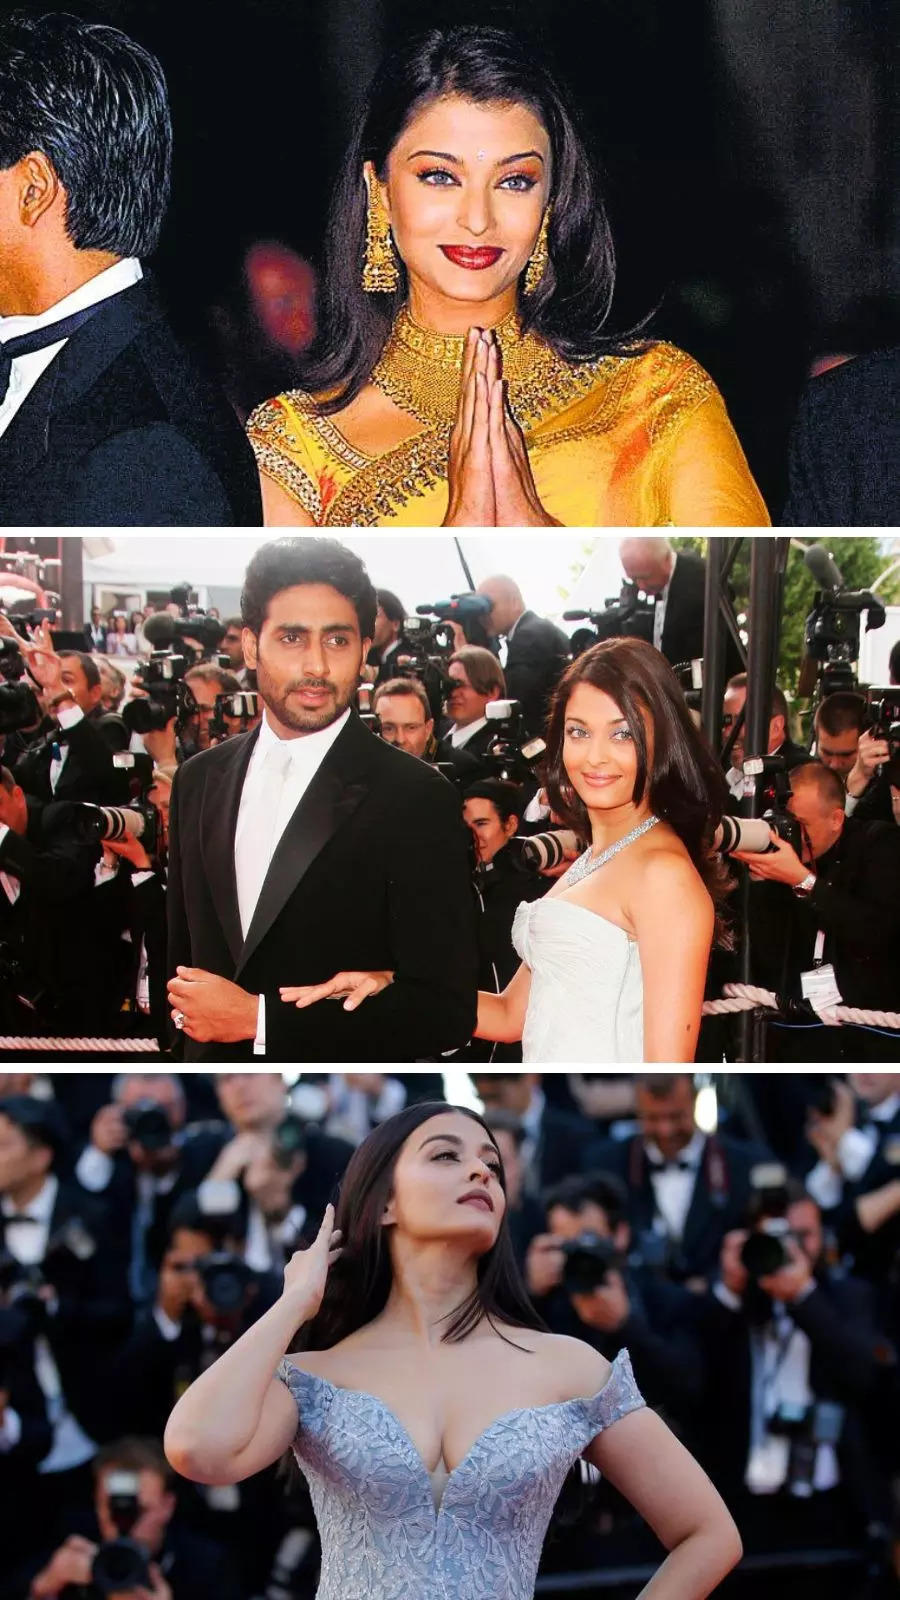 Aishwarya Rai's dramatic looks from black gown with 3D flowers to hot pink  suit